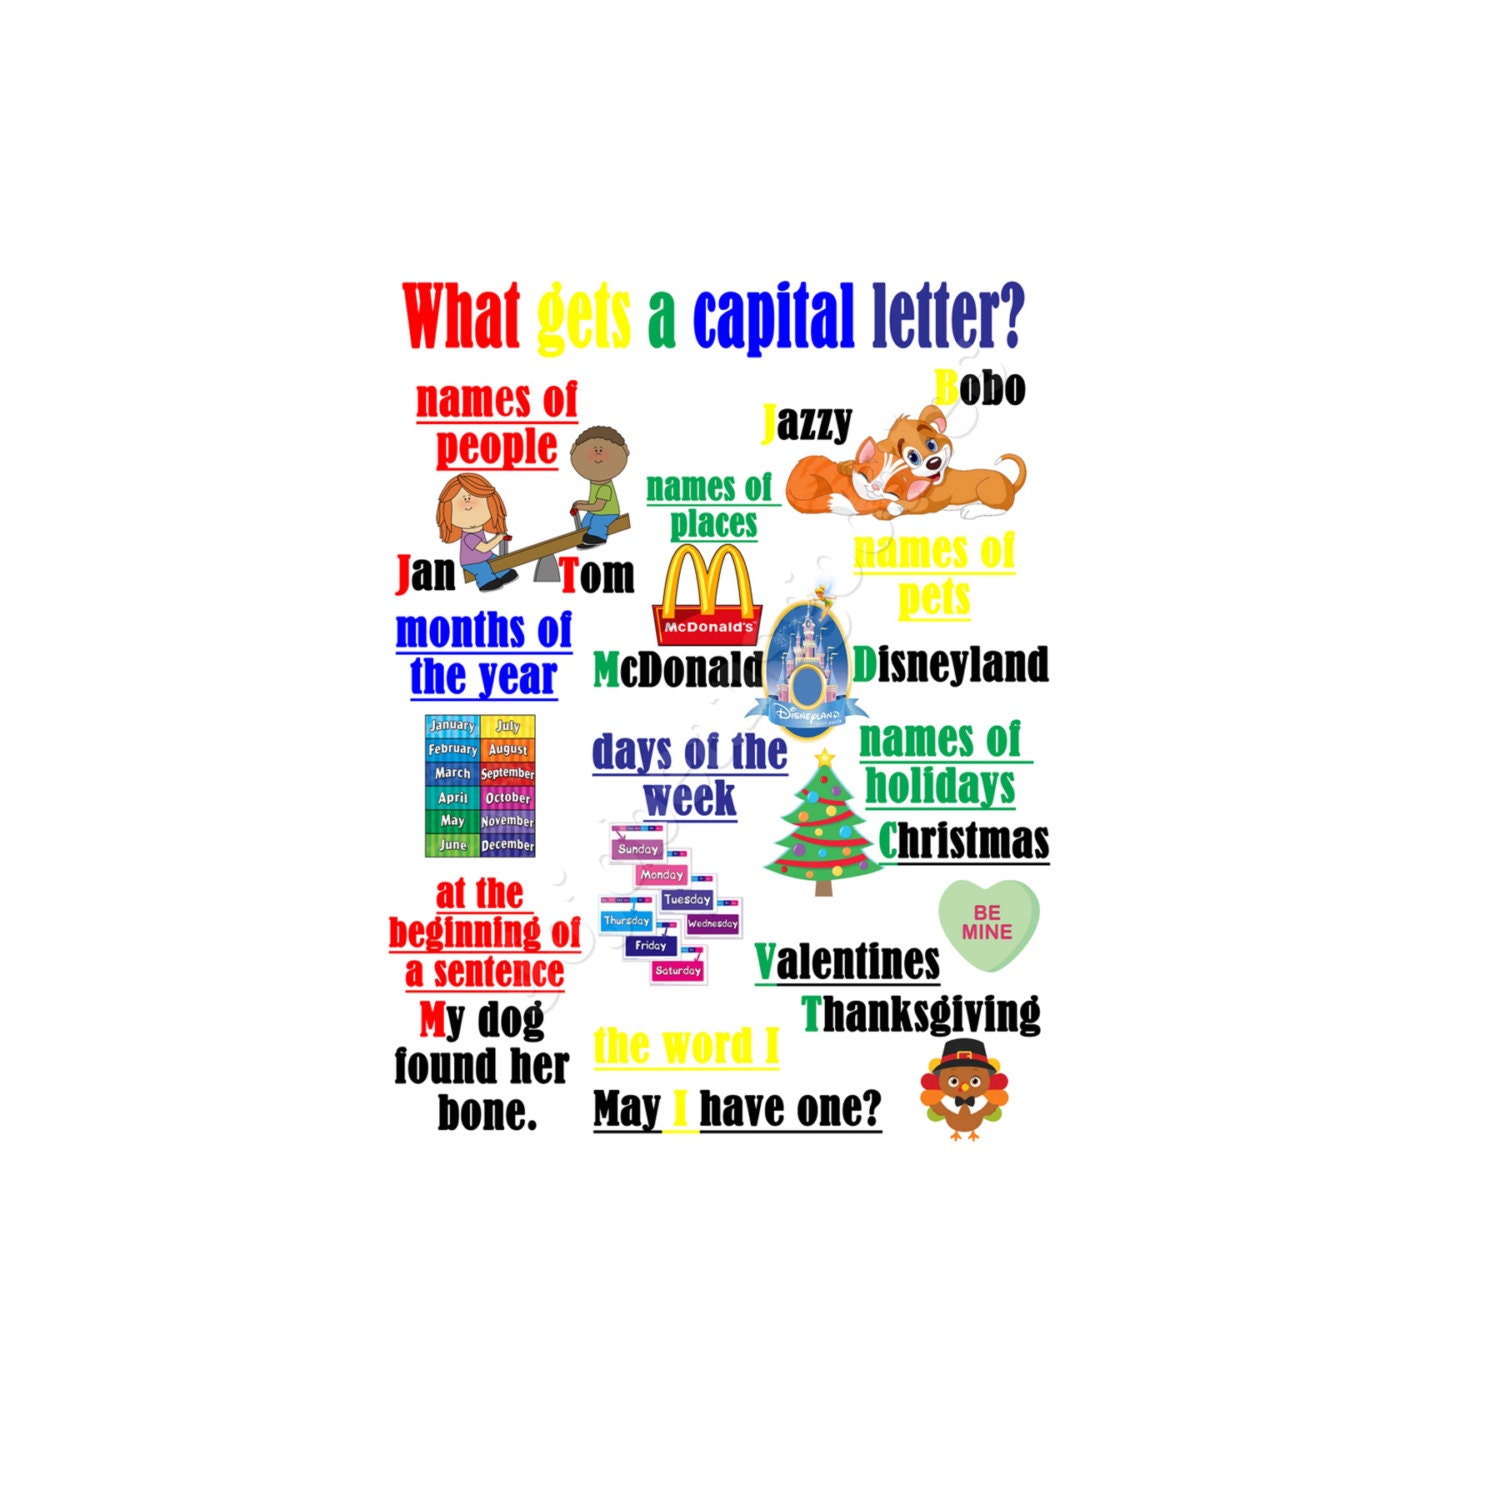 match-small-letter-to-capital-letter-worksheet-capital-letters